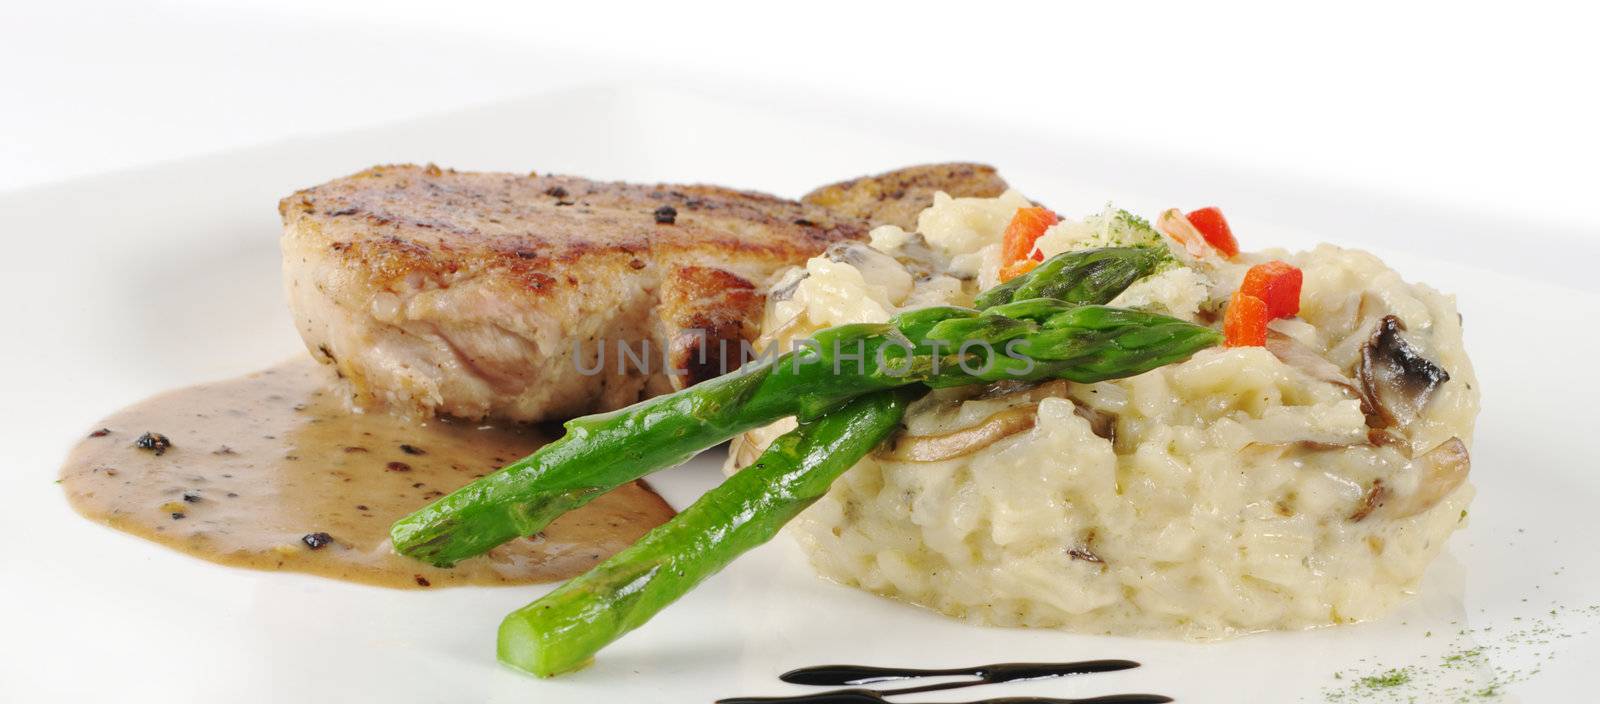 Risotto, green asparagus and meat with gravy on a garnished white plate (Selective Focus, Focus on the plane of the head of the asparagus)